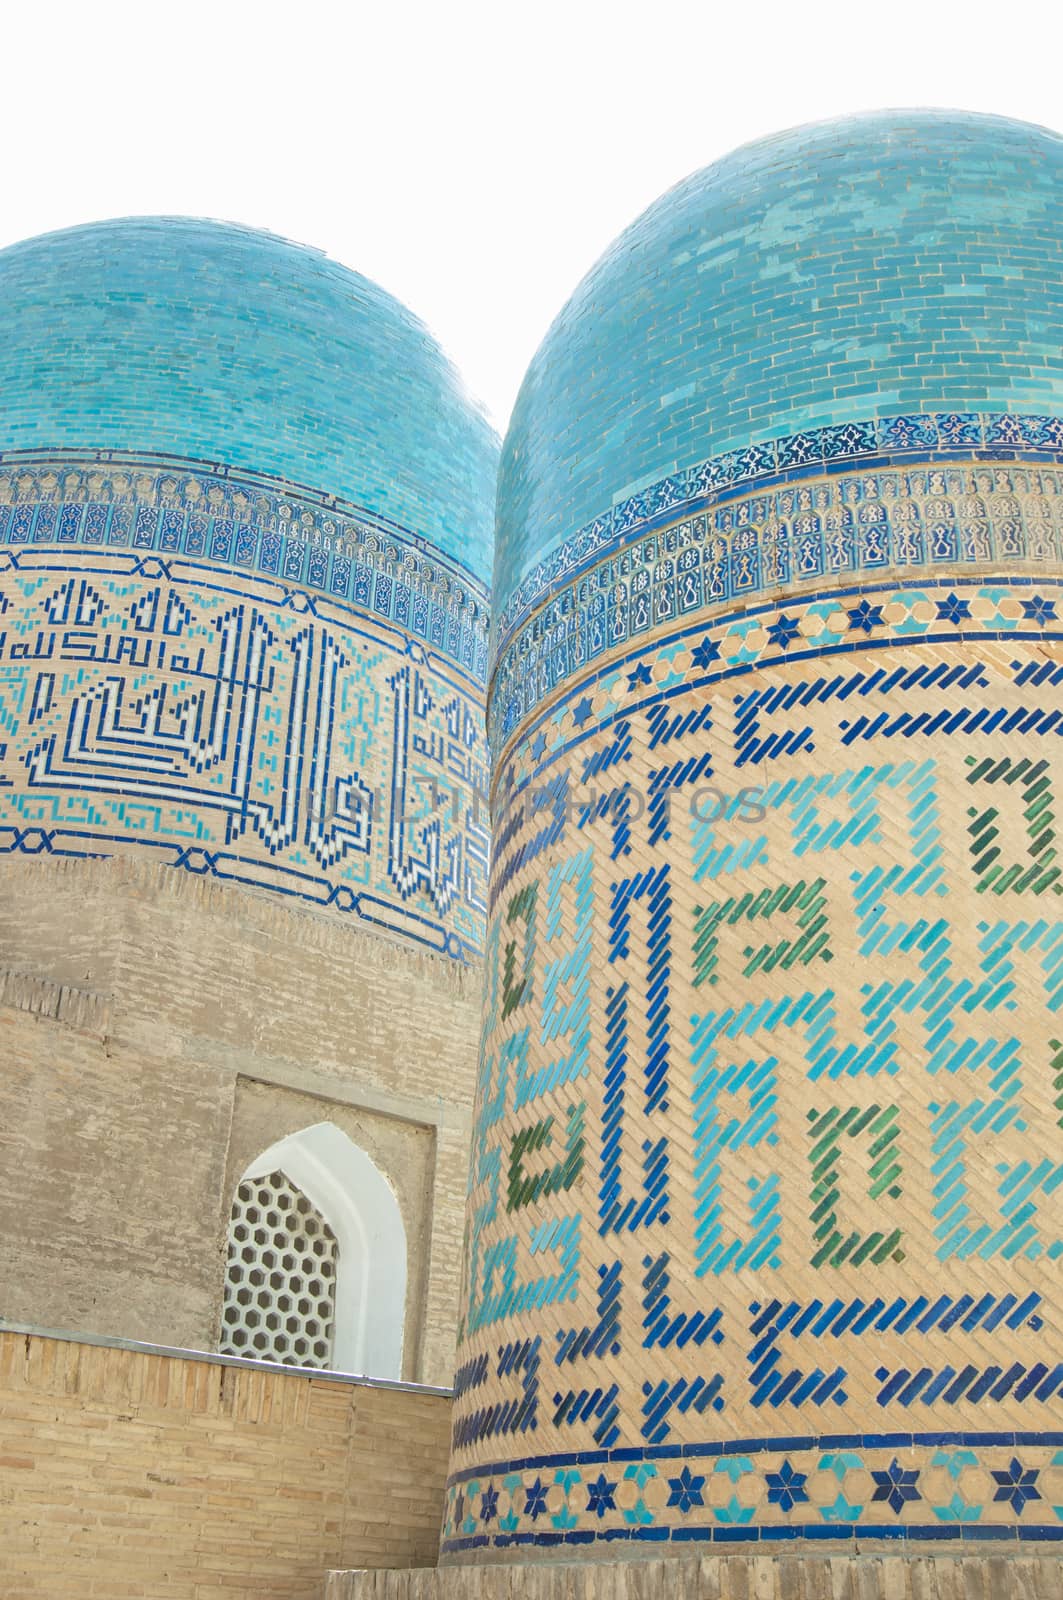 Domes and towers of Registan in Samarkand. Ancient architecture of Central Asia